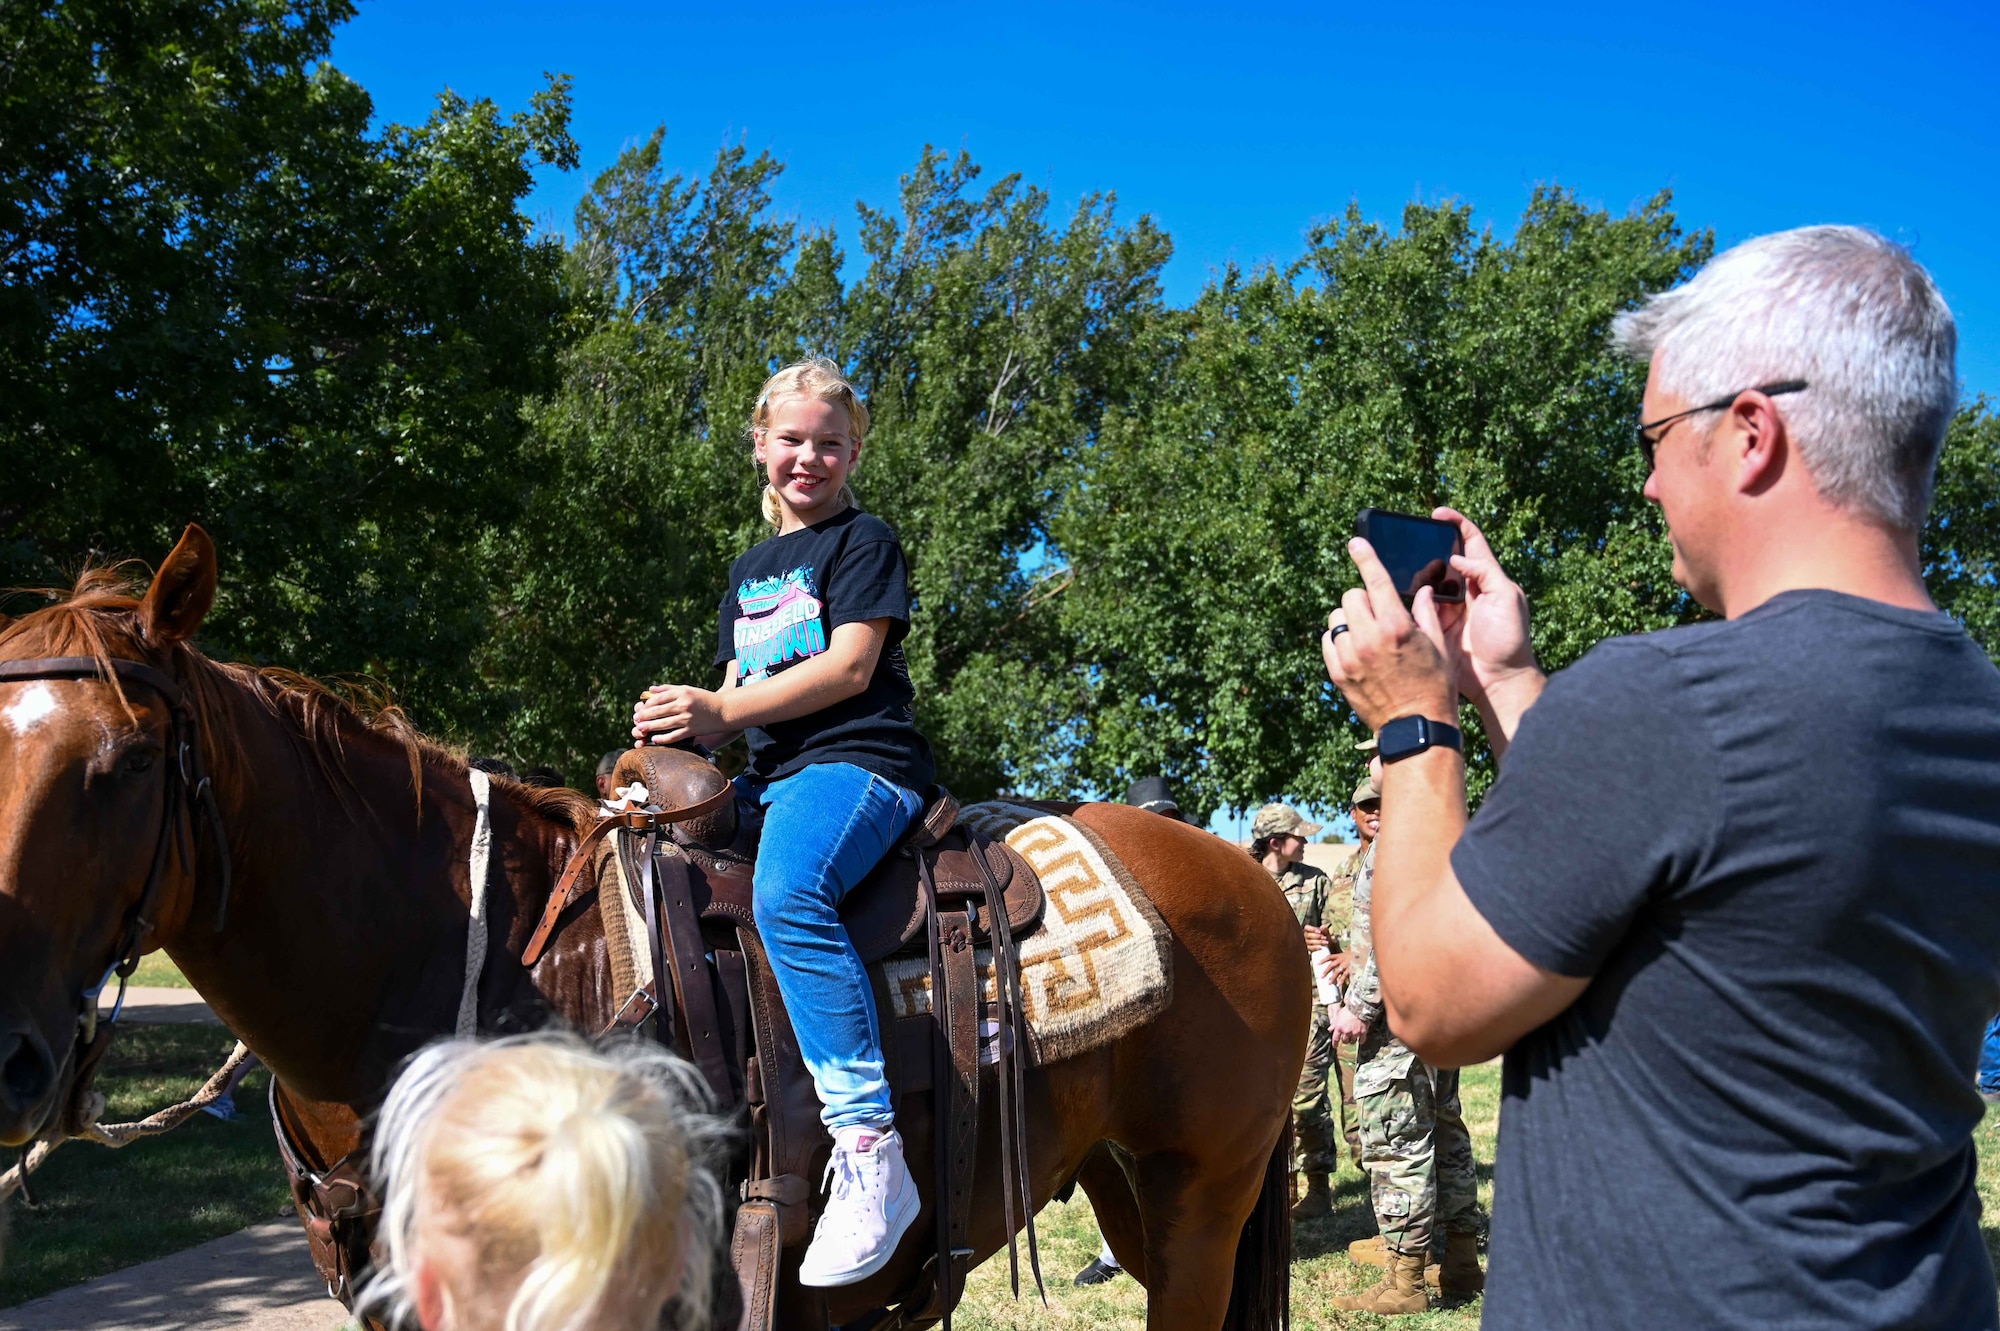 U.S. Air Force Maj. J.D. Oredson, 58th Airlift Squadron instructor pilot, takes a photo of his daughter, Phoebe, during the 25th Annual Cattle Drive at Altus Air Force Base (AFB), Oklahoma, Aug. 24, 2023. Altus AFB’s cattle drive started in 1999 when 15 riders and a herd of roughly 30 longhorn cattle paraded through the streets of Altus AFB. (U.S. Air Force photo by Airman 1st Class Kari Degraffenreed)